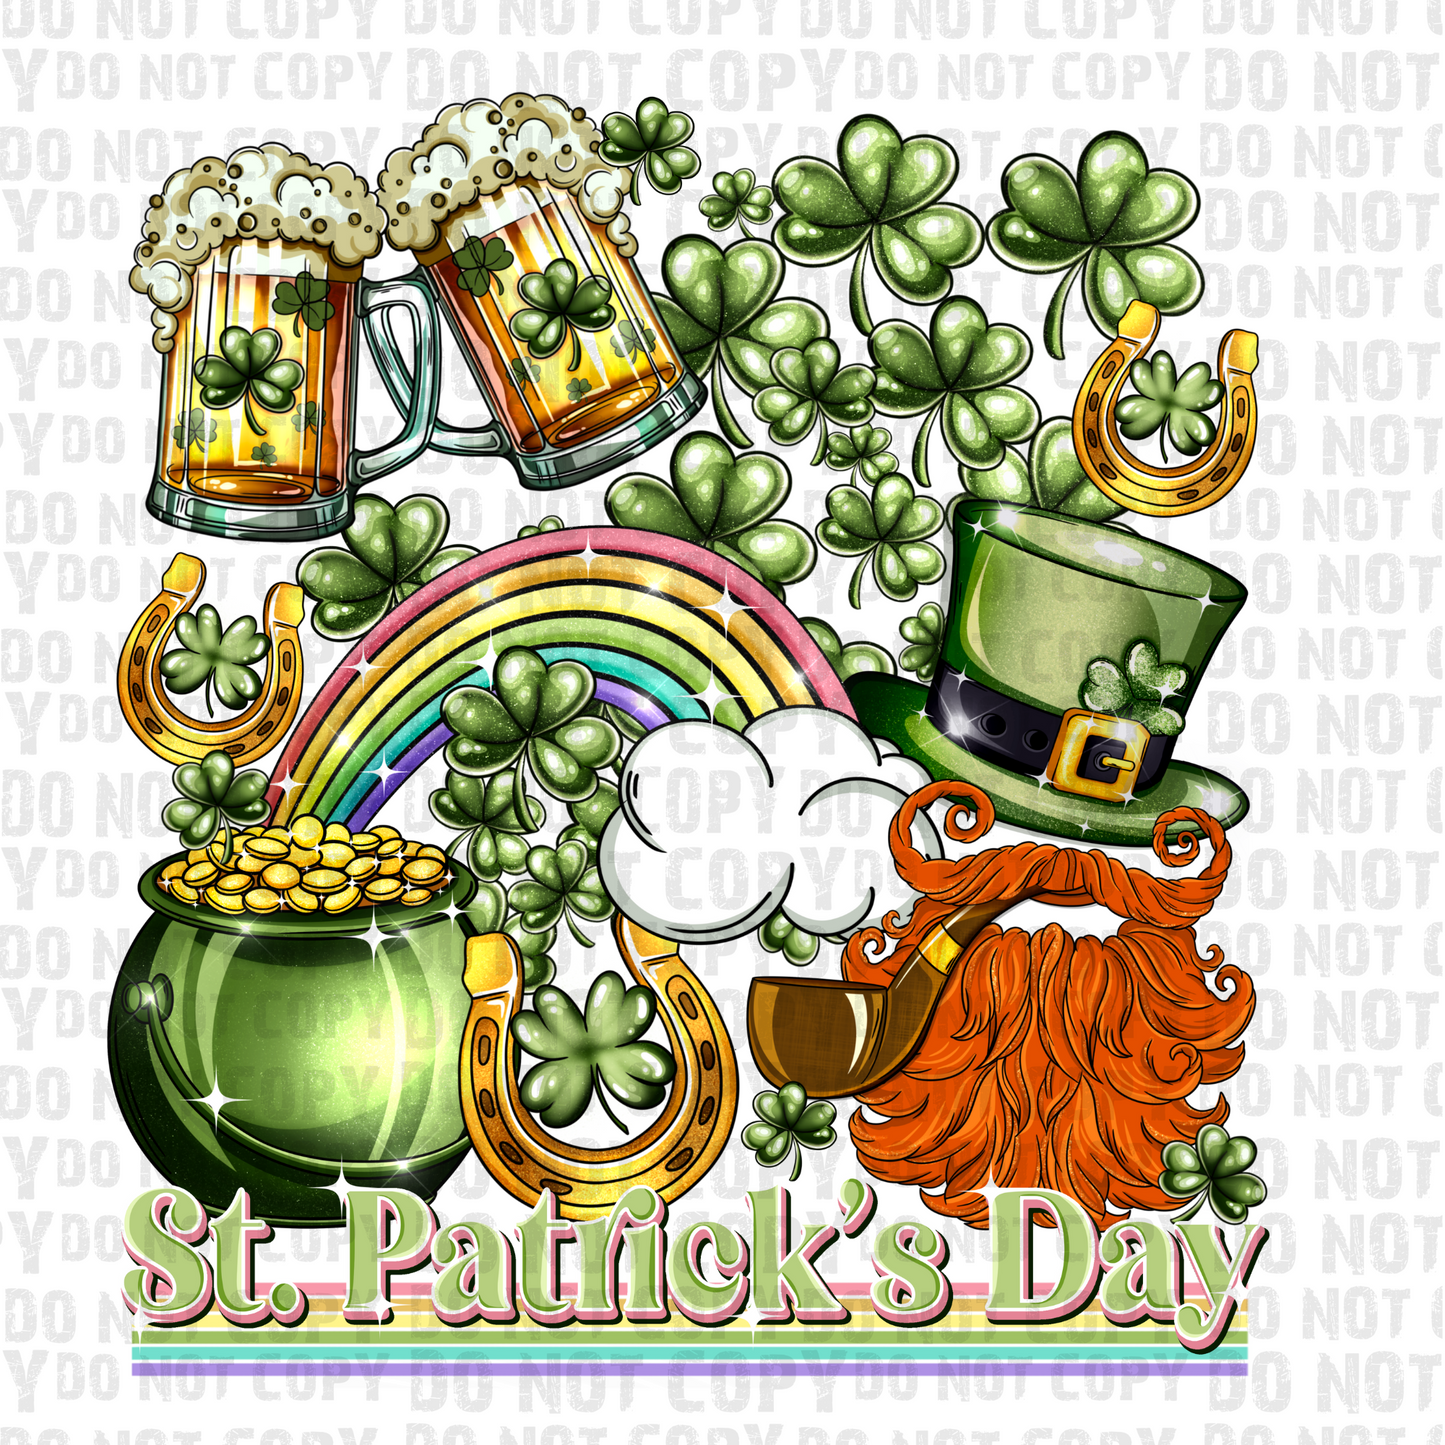 St. Patricks Day (All the things)